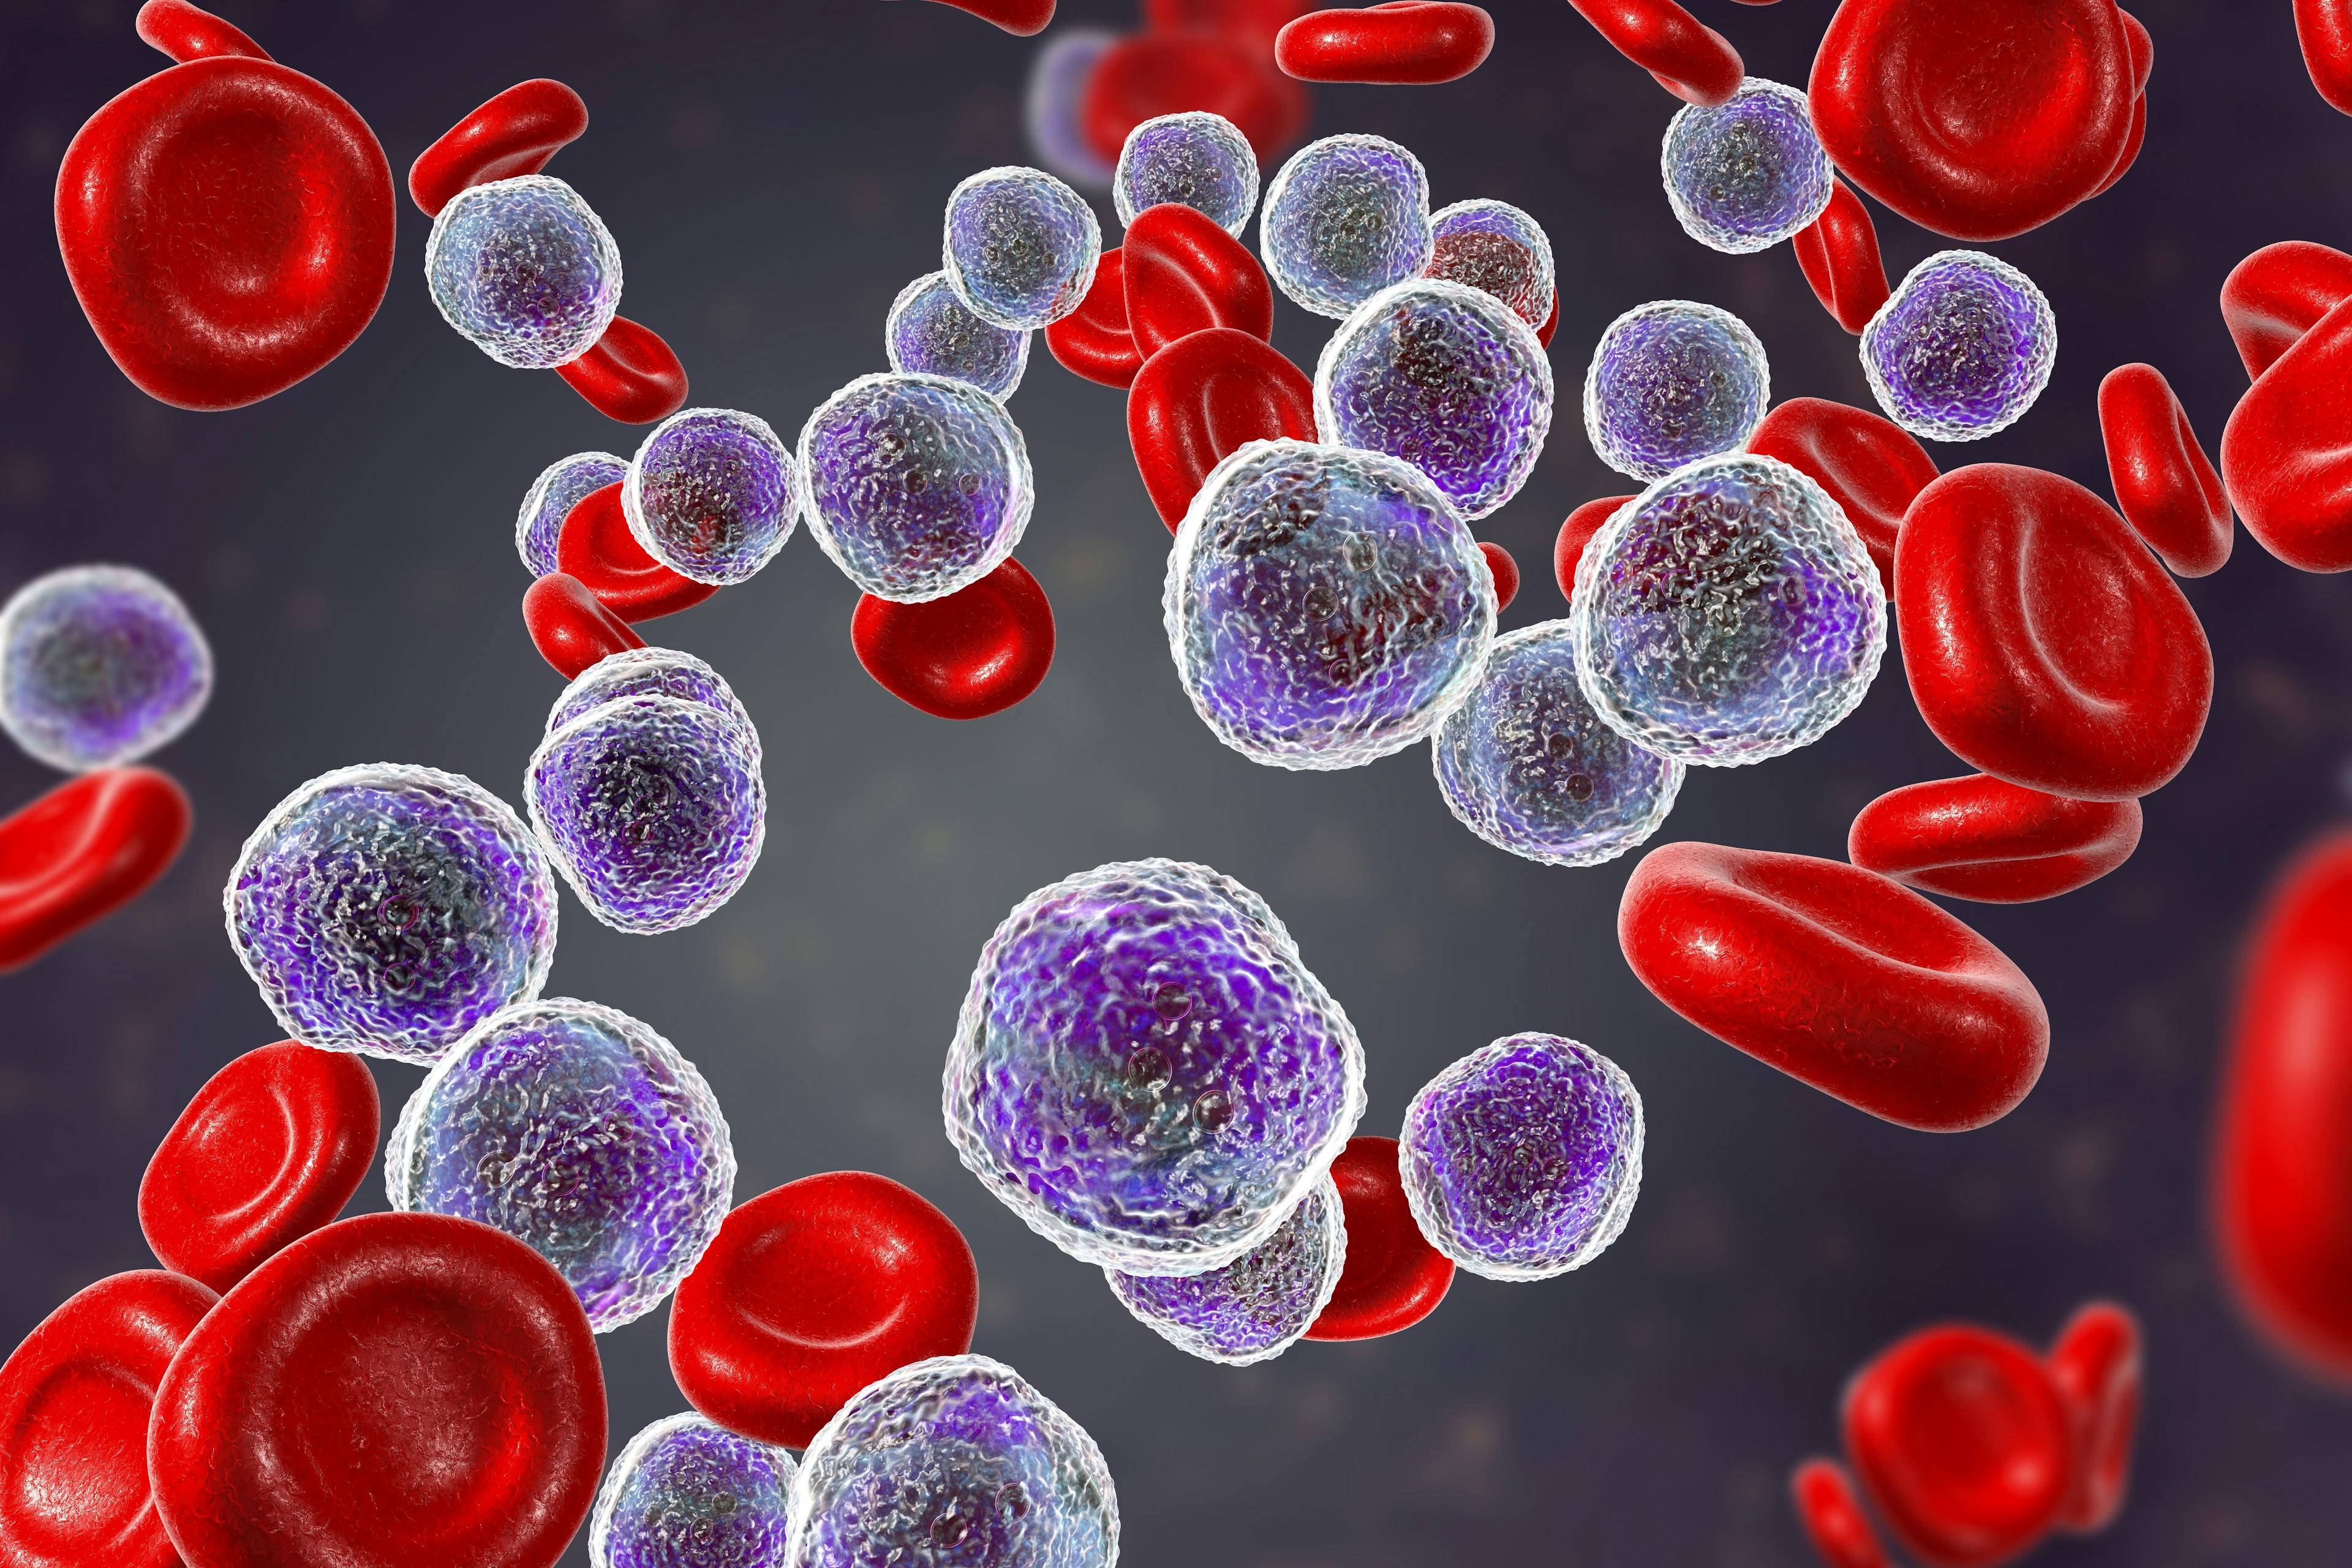 A real-world population of patients with relapsed/refractory B-cell acute lymphoblastic leukemia are reported to have had a high rate of complete remissions following treatment with brexucabtagene autoleucel.